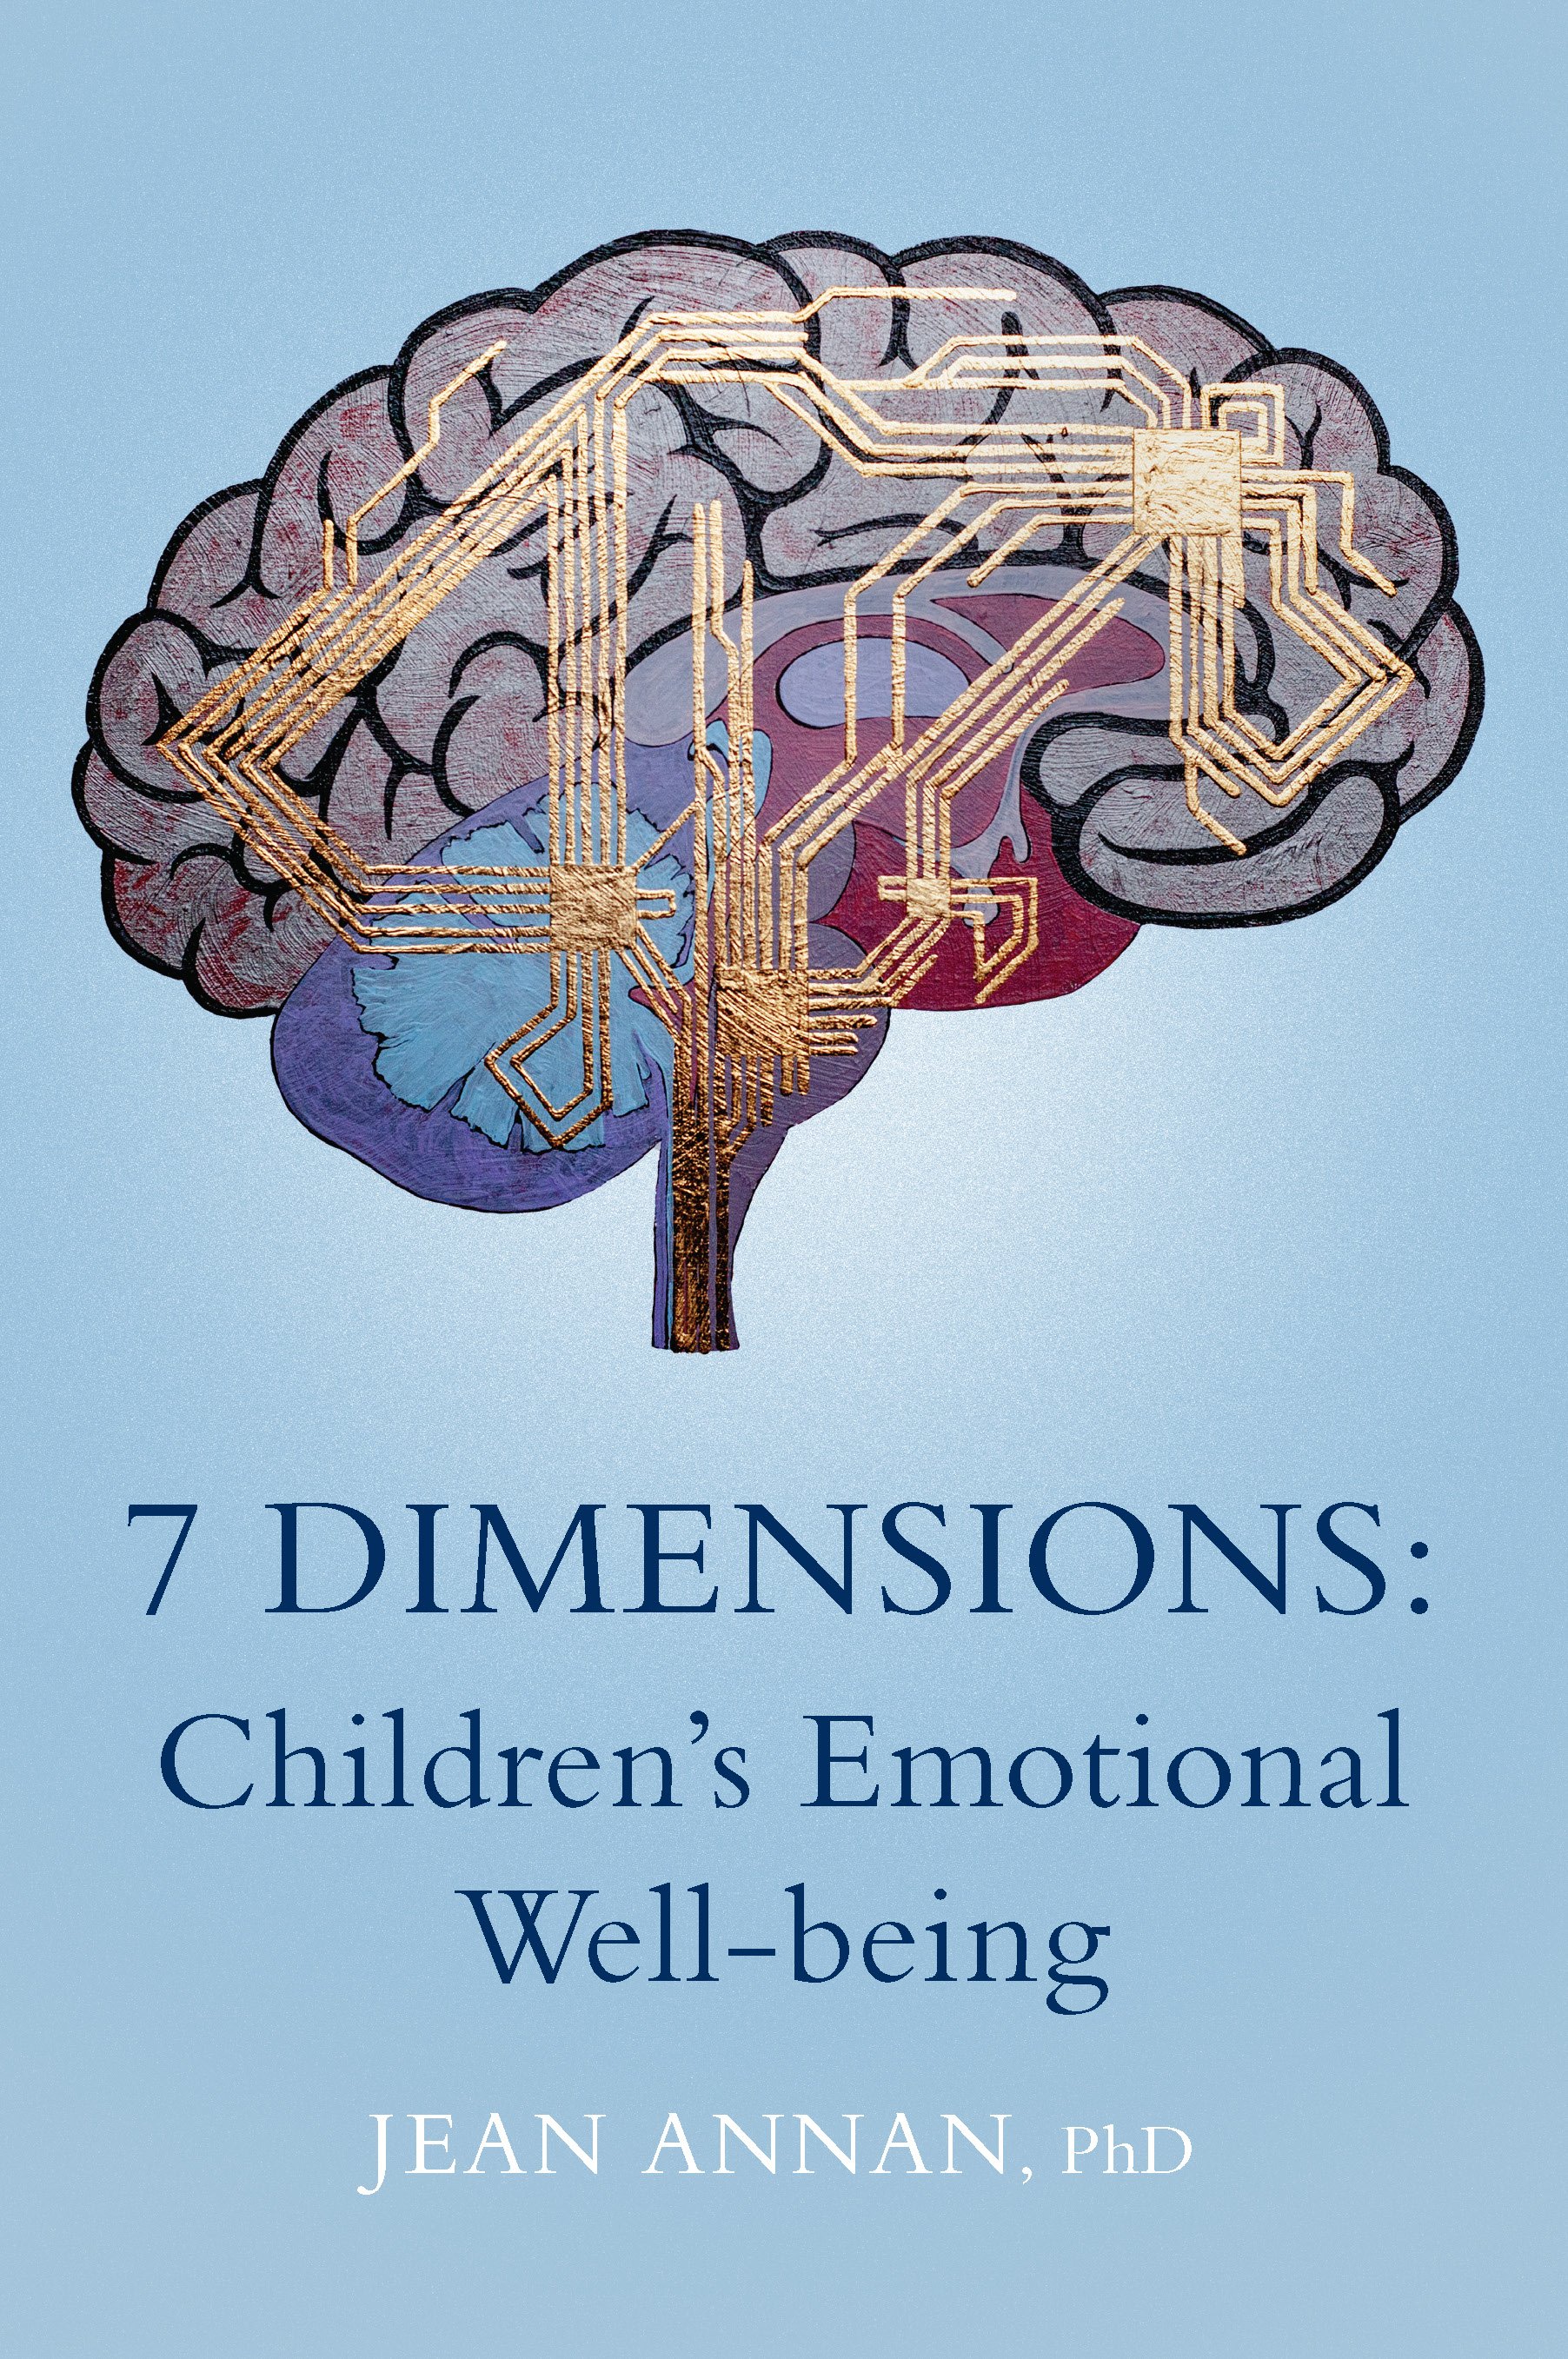  “7 Dimensions: Children’s Emotional Well-being” introduces a framework designed to help adults make simple sense of the plethora of information available about young people’s feelings, thoughts and ways of responding. Based on up-to-date neuroscienc